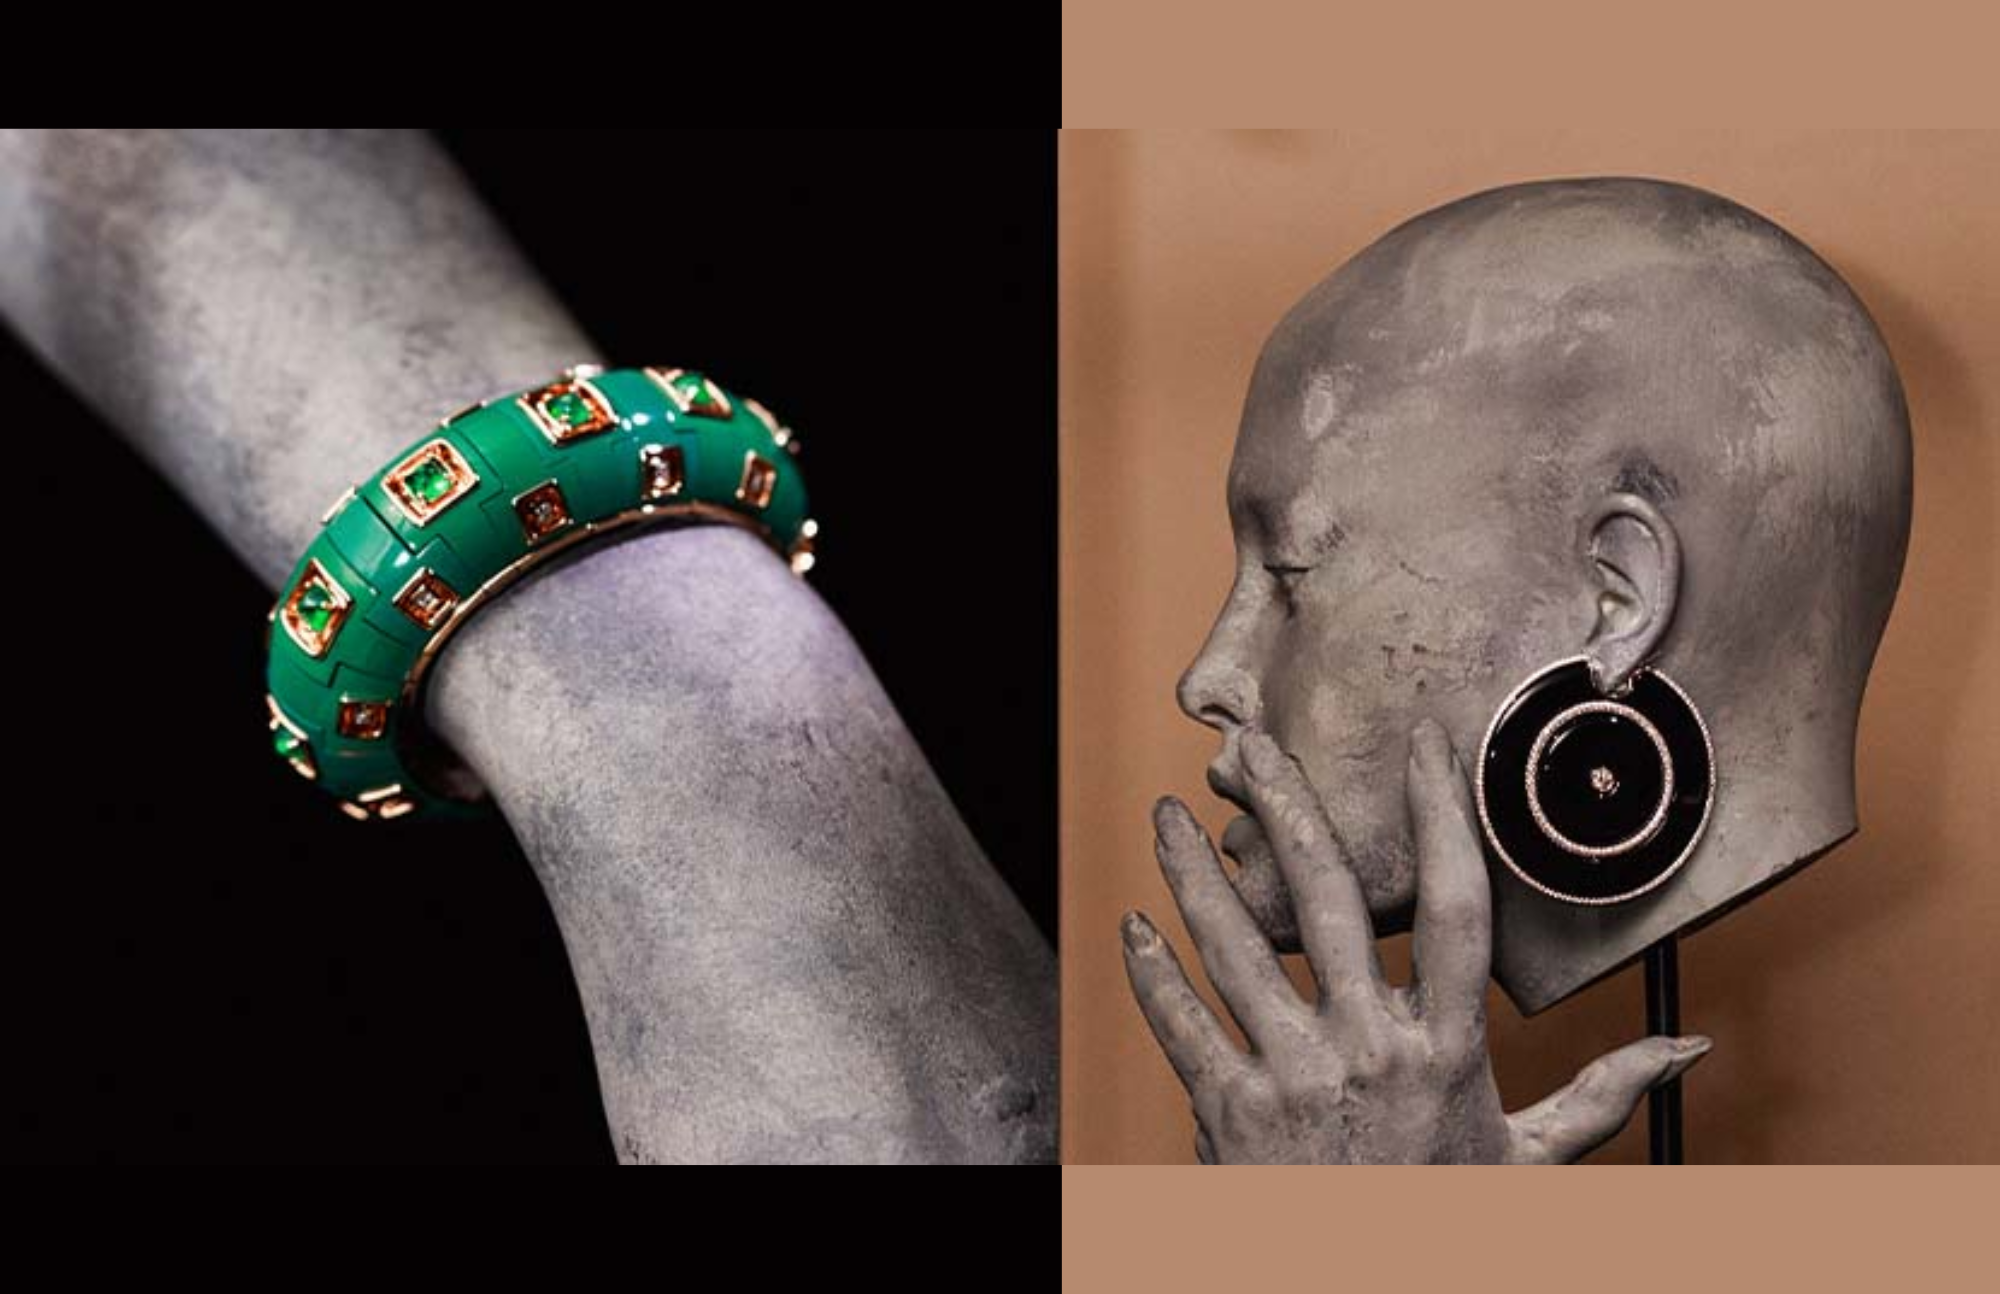 Art Deco Jewels - These Jewels Are What We've Been Looking For